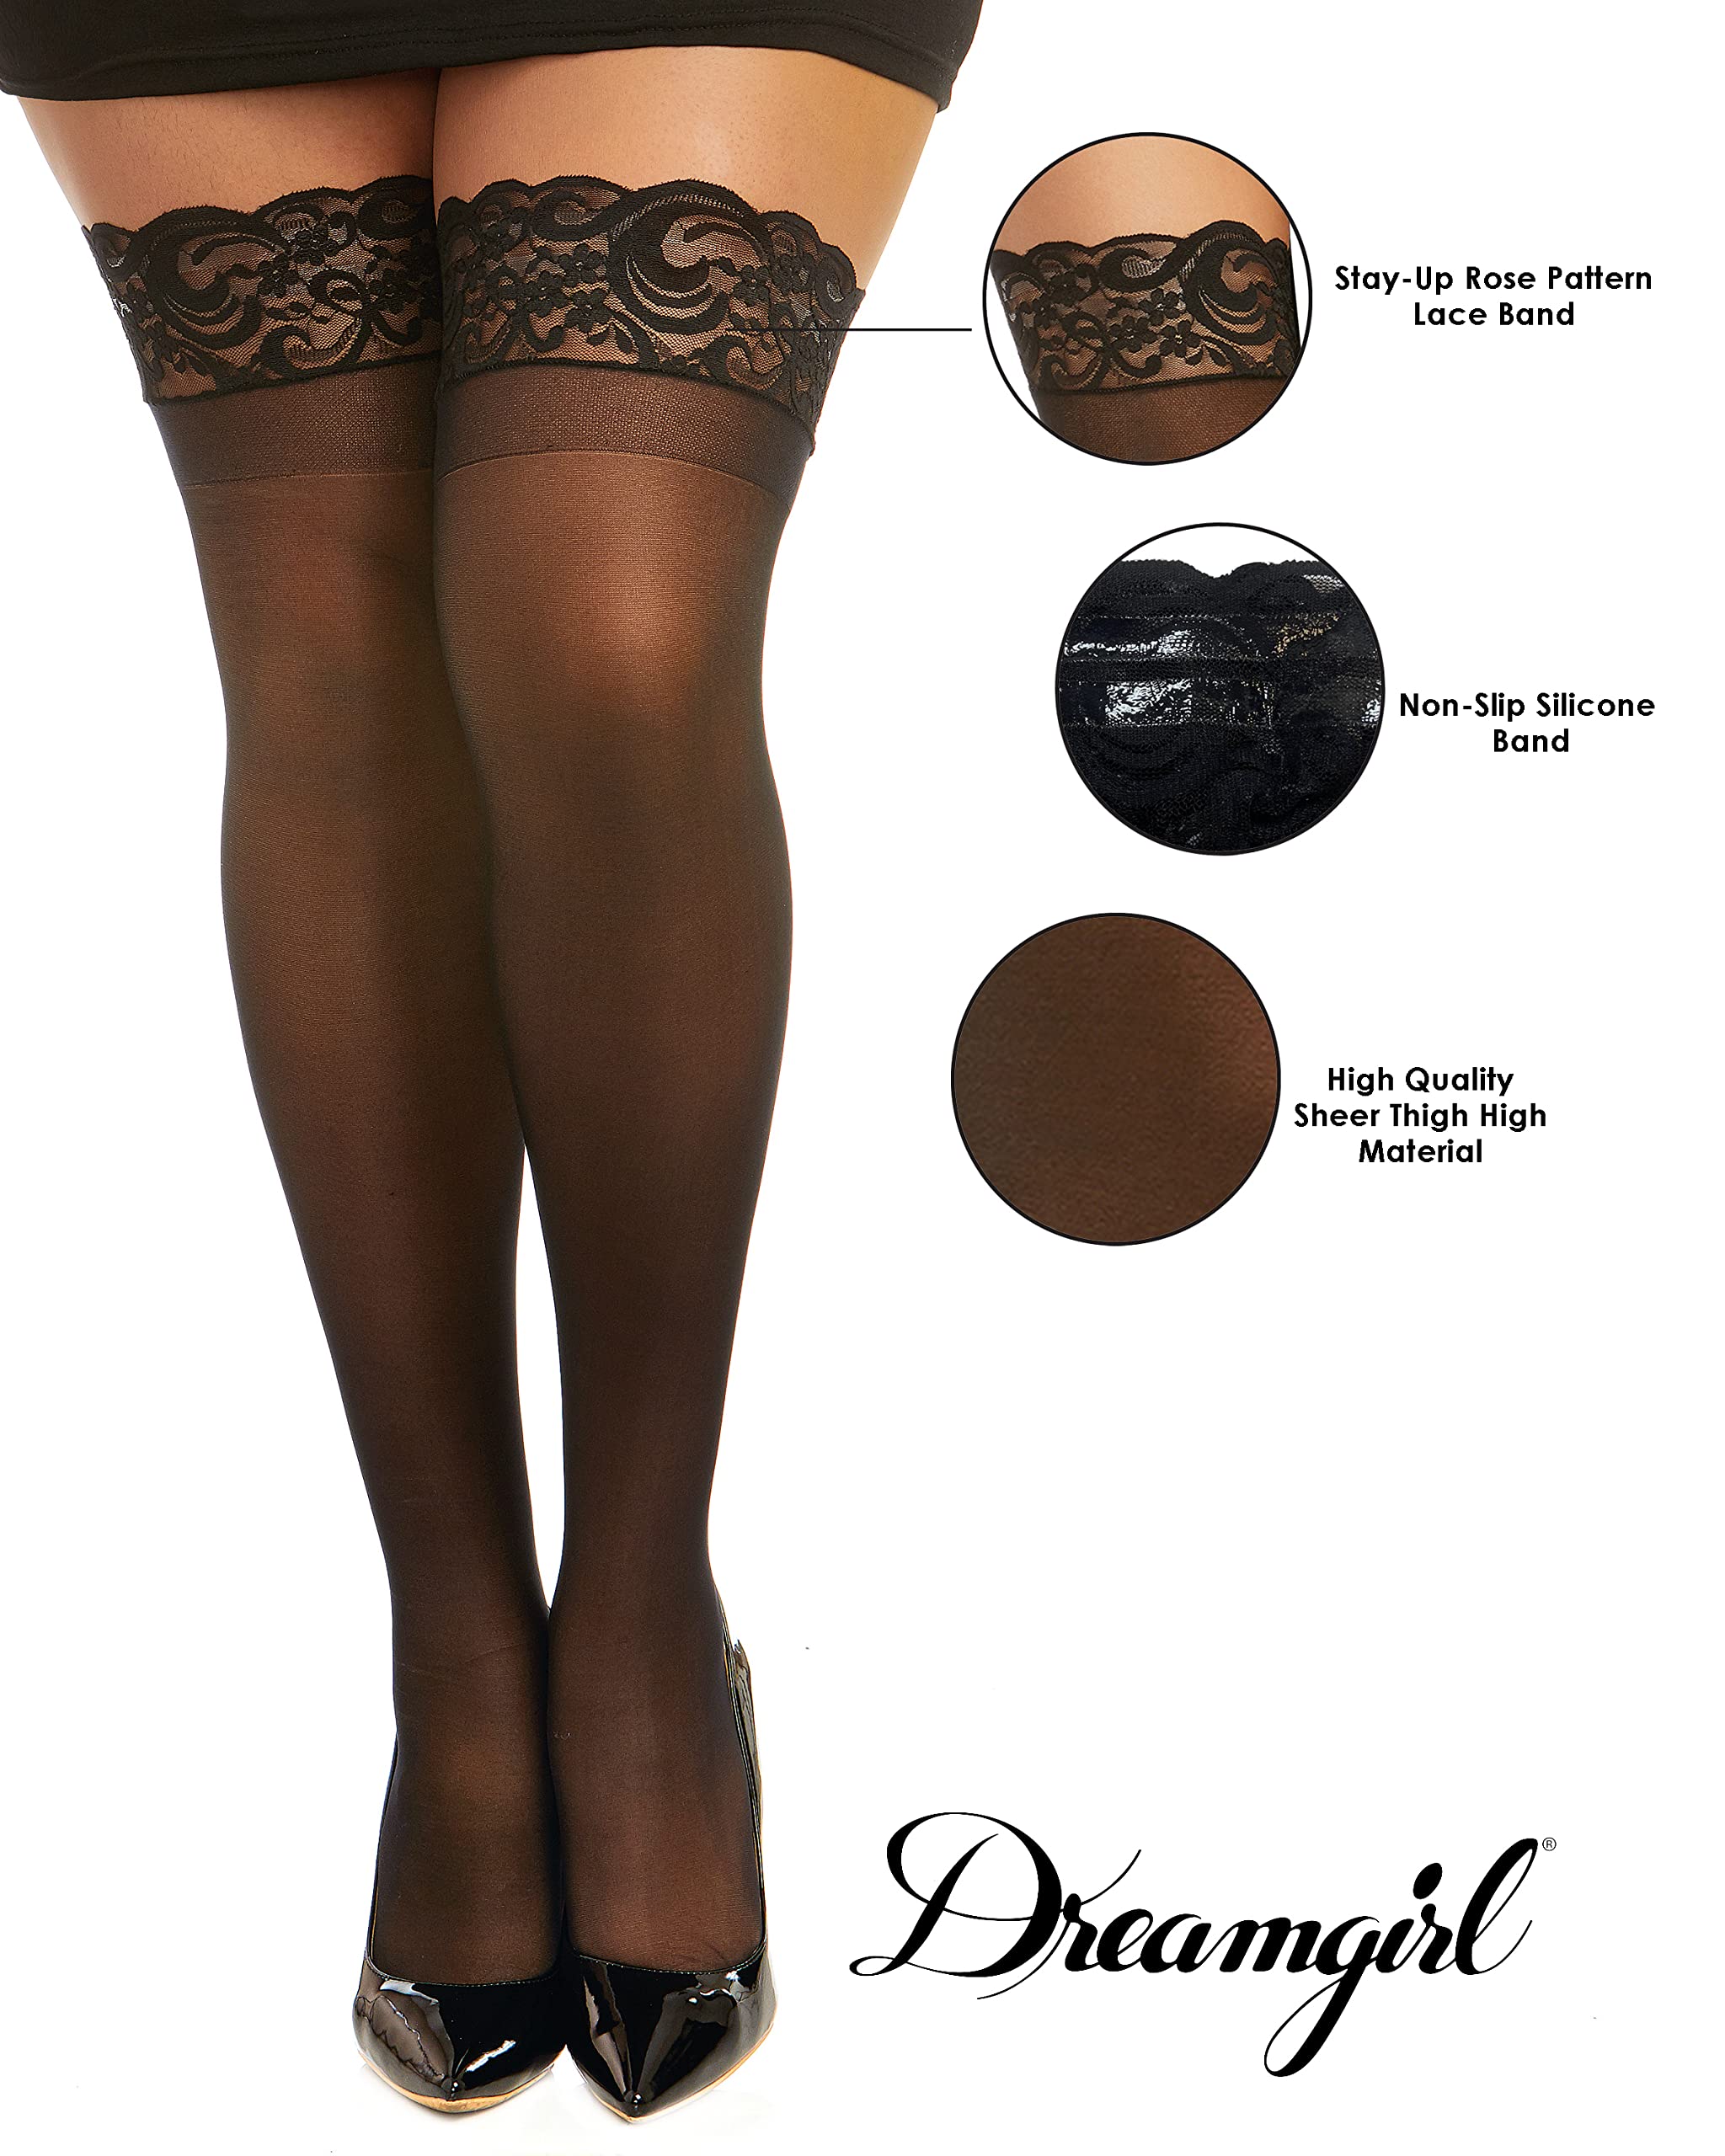 Dreamgirl Women's Plus Size Sheer Thigh High Pantyhose, Hosiery, Nylons, Stockings with Comfort Lace Top Anti-Slip Silicone Elastic Band, Black